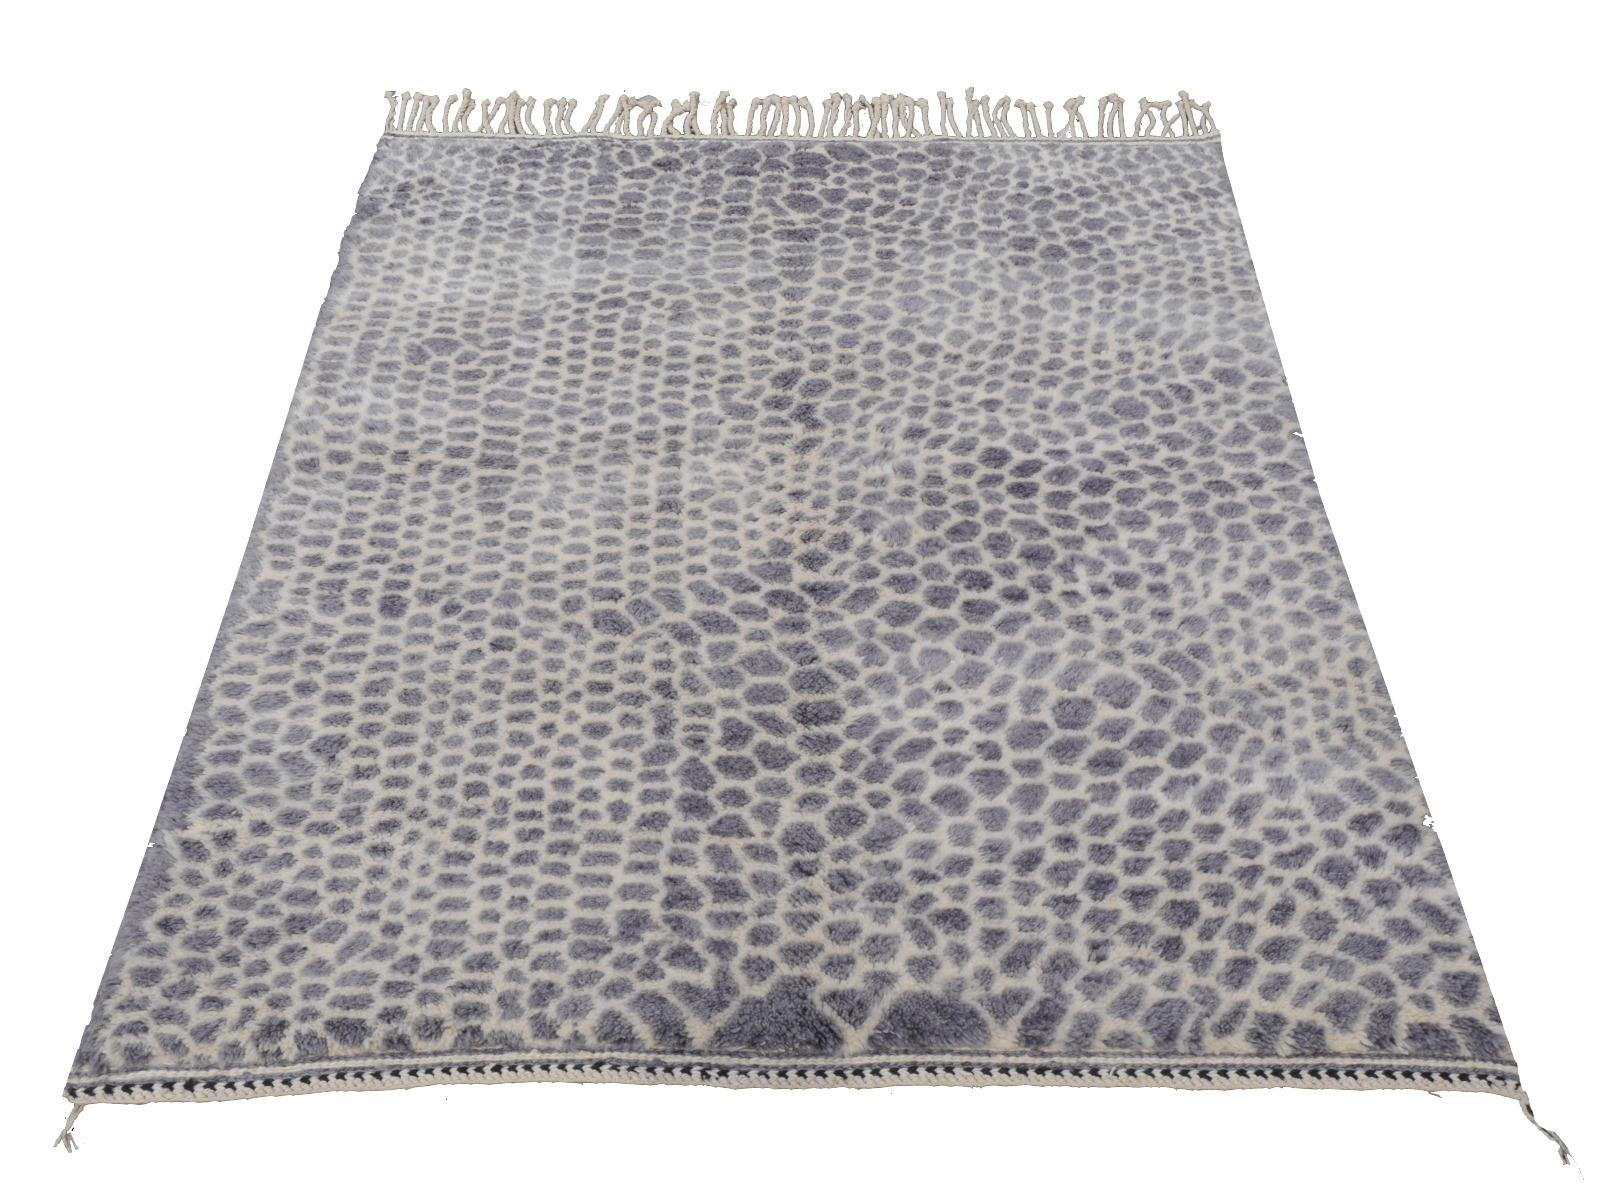 Contemporary North African Moroccan Berber Rug Leopard Cheetah Design Soft Quality Gray Beige For Sale